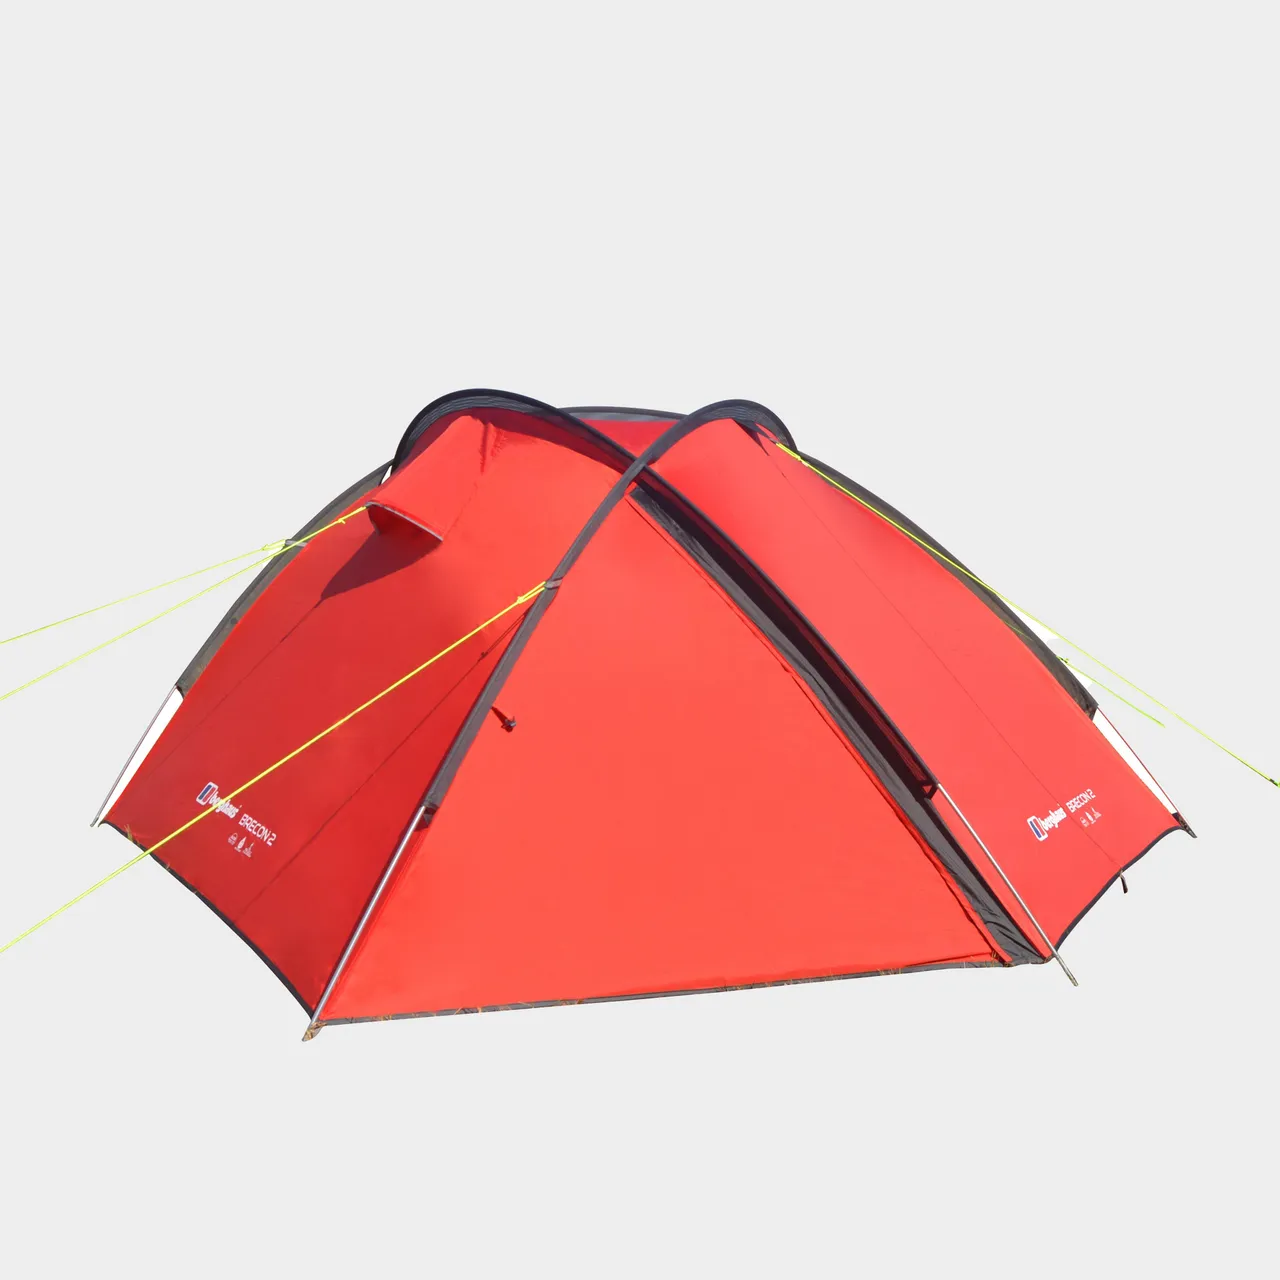 Brecon 2 Tent - Red, Red